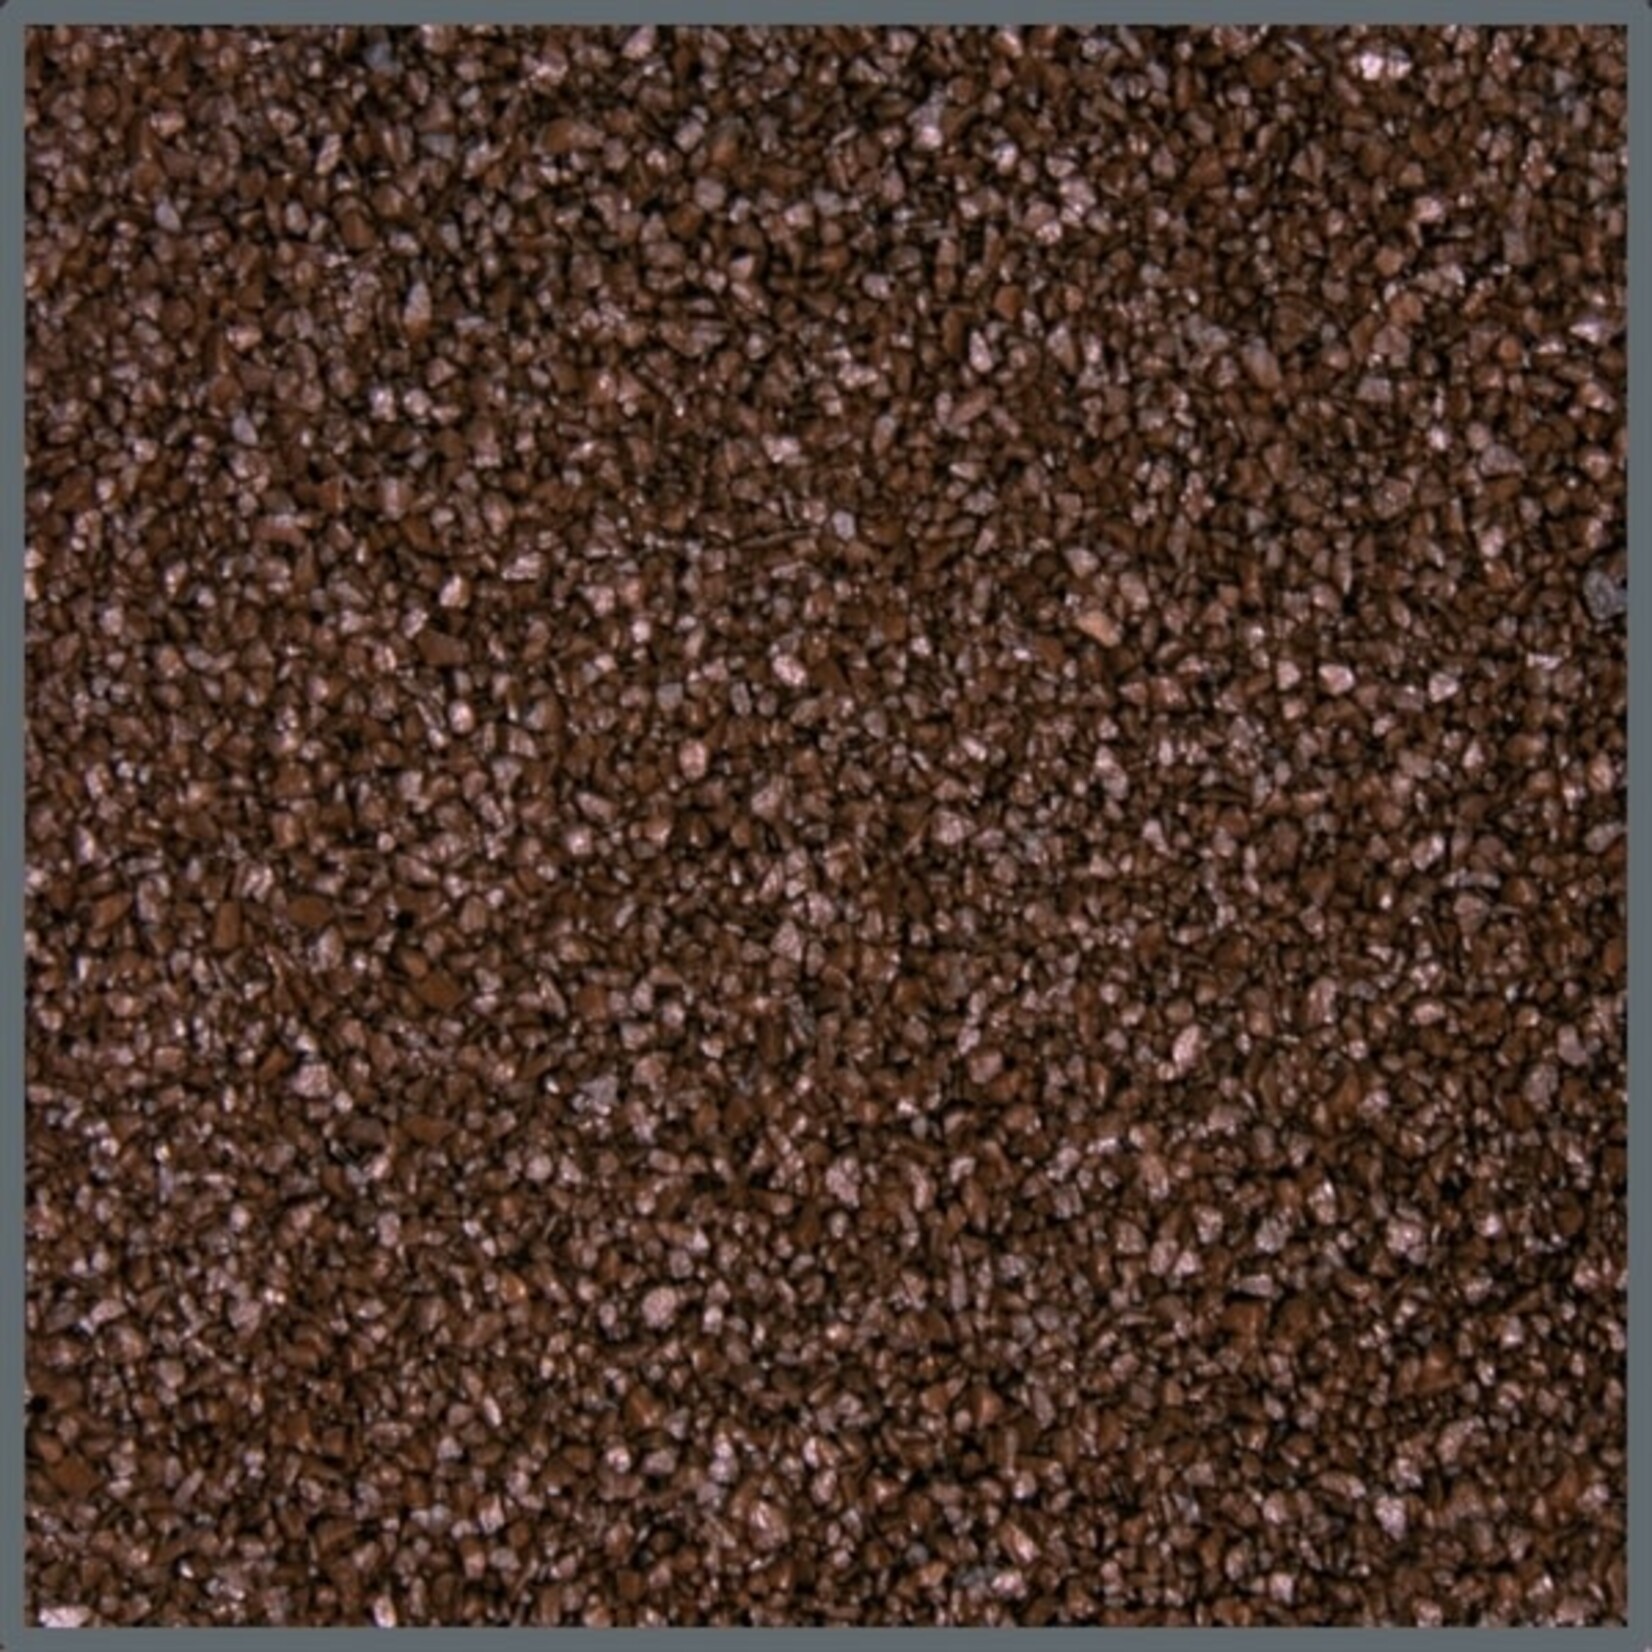 Dupla DUPLA GROUND COLOUR BROWN CHOCOLATE 0.5-1.4 MM 5 KG